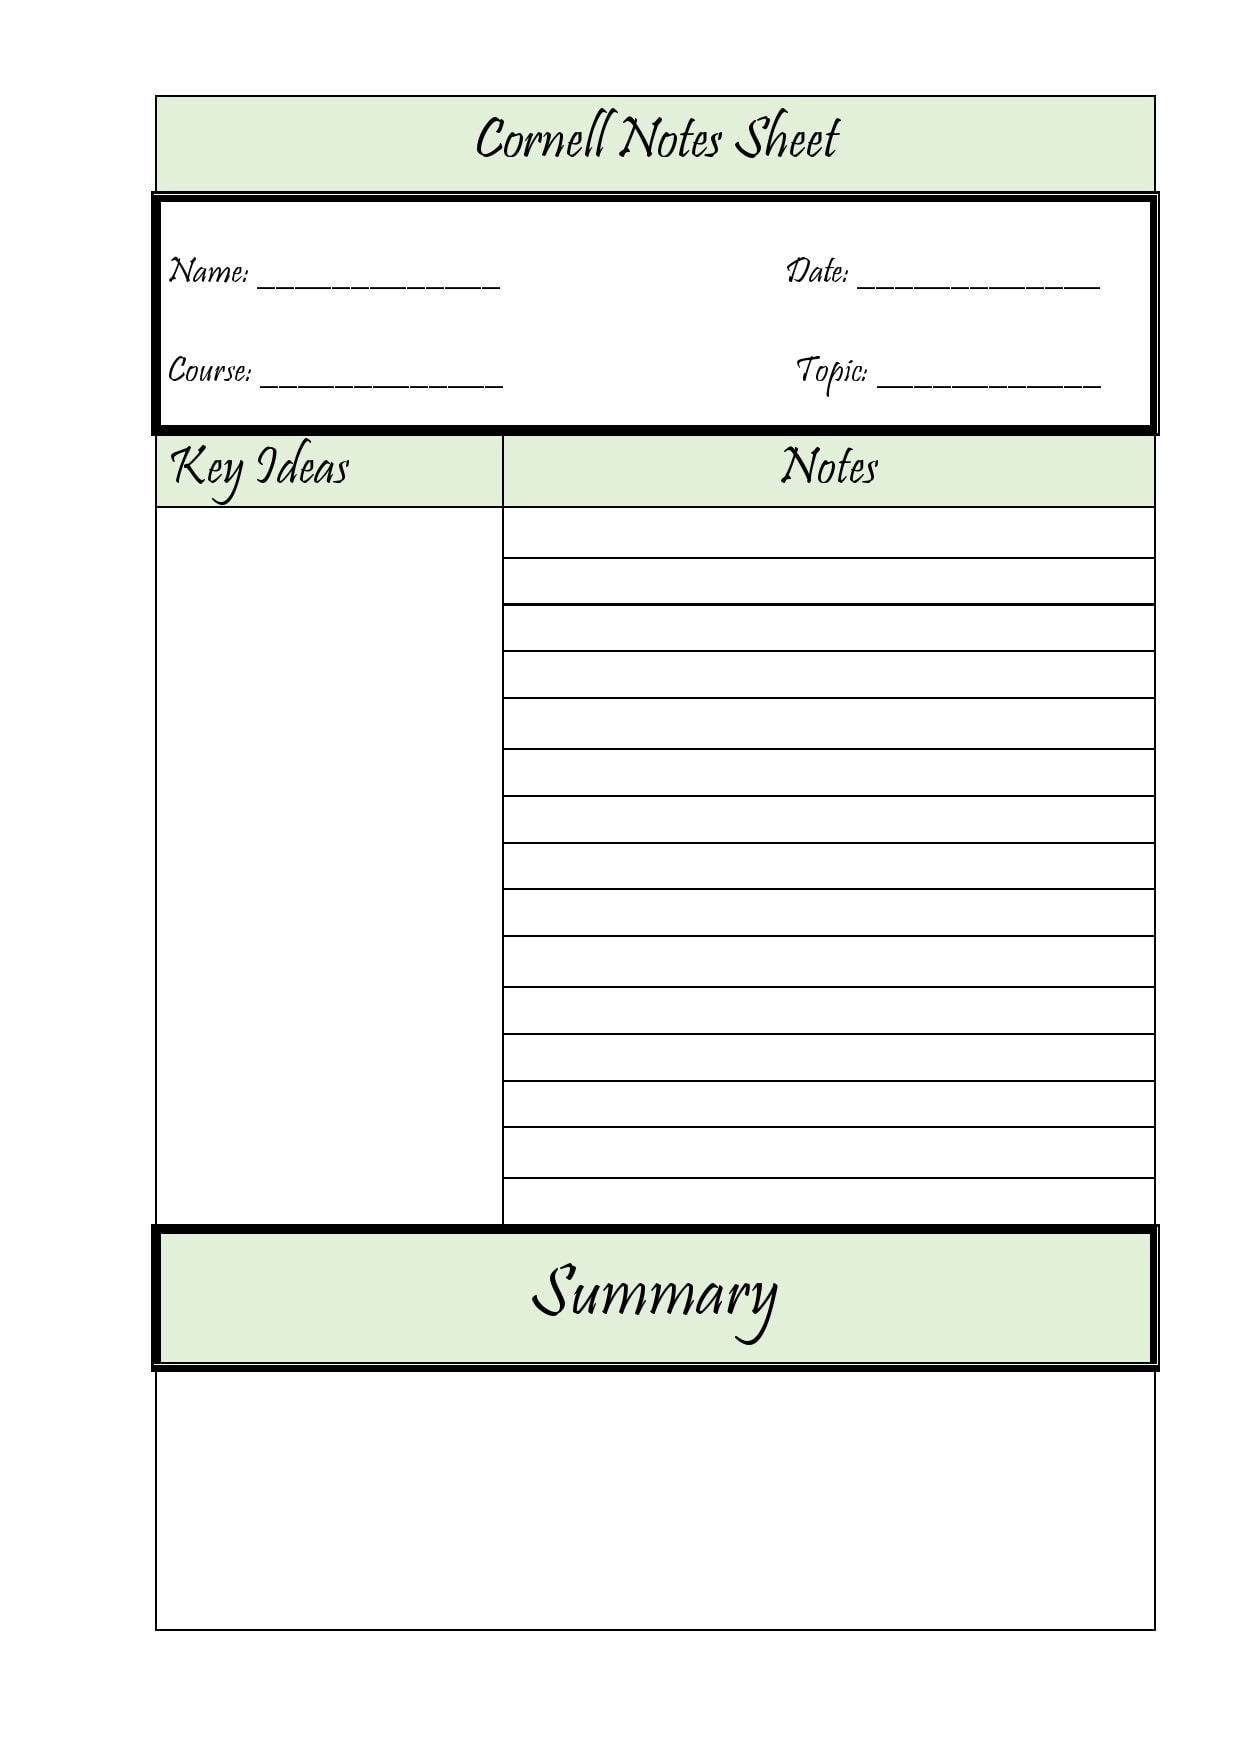 22 Printable Cornell Notes Templates [Free] - TemplateArchive Pertaining To Note Taking Template Word